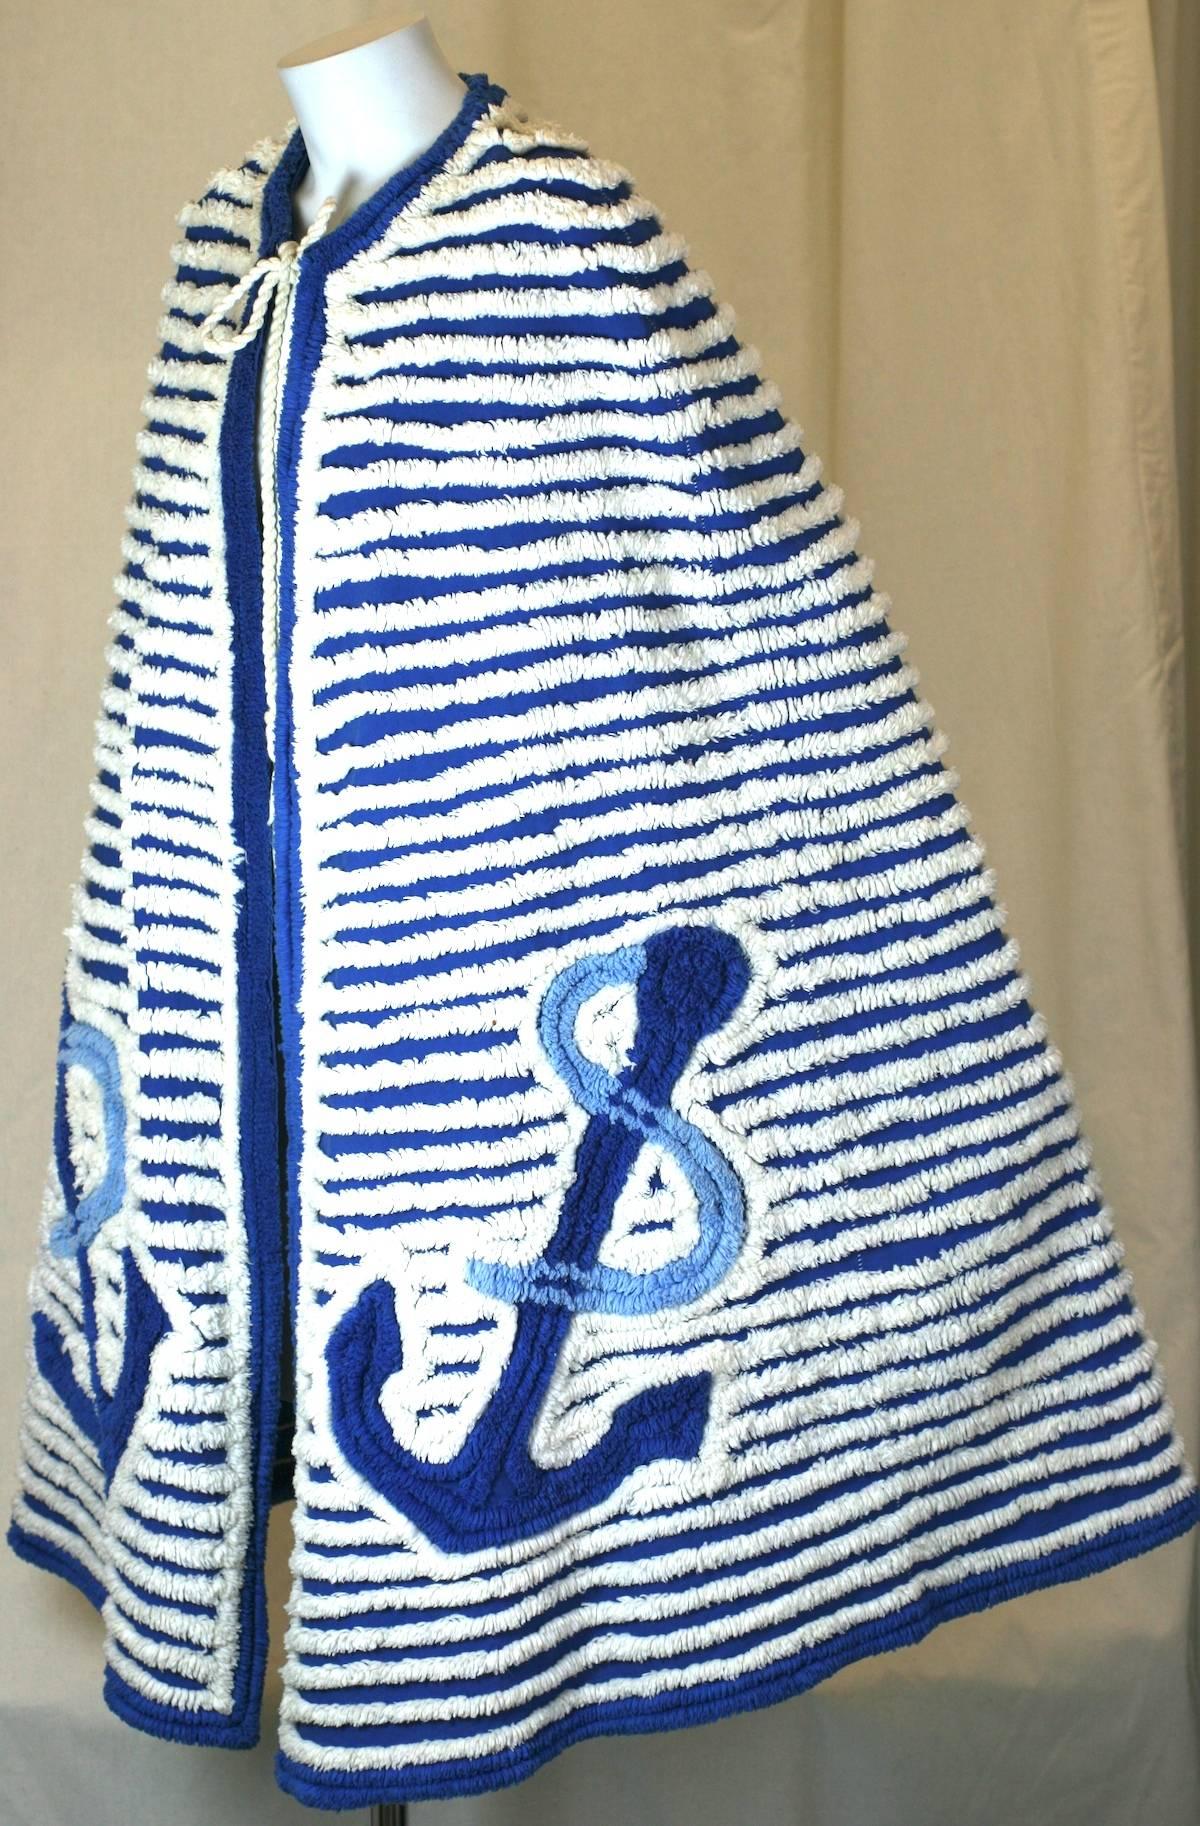 Charming Art Deco Chenille Cape in shades of blue and white. Nautical themed with anchor motifs on front. Ties simply at neck. 1940's USA. 
Excellent condition.
Length 38